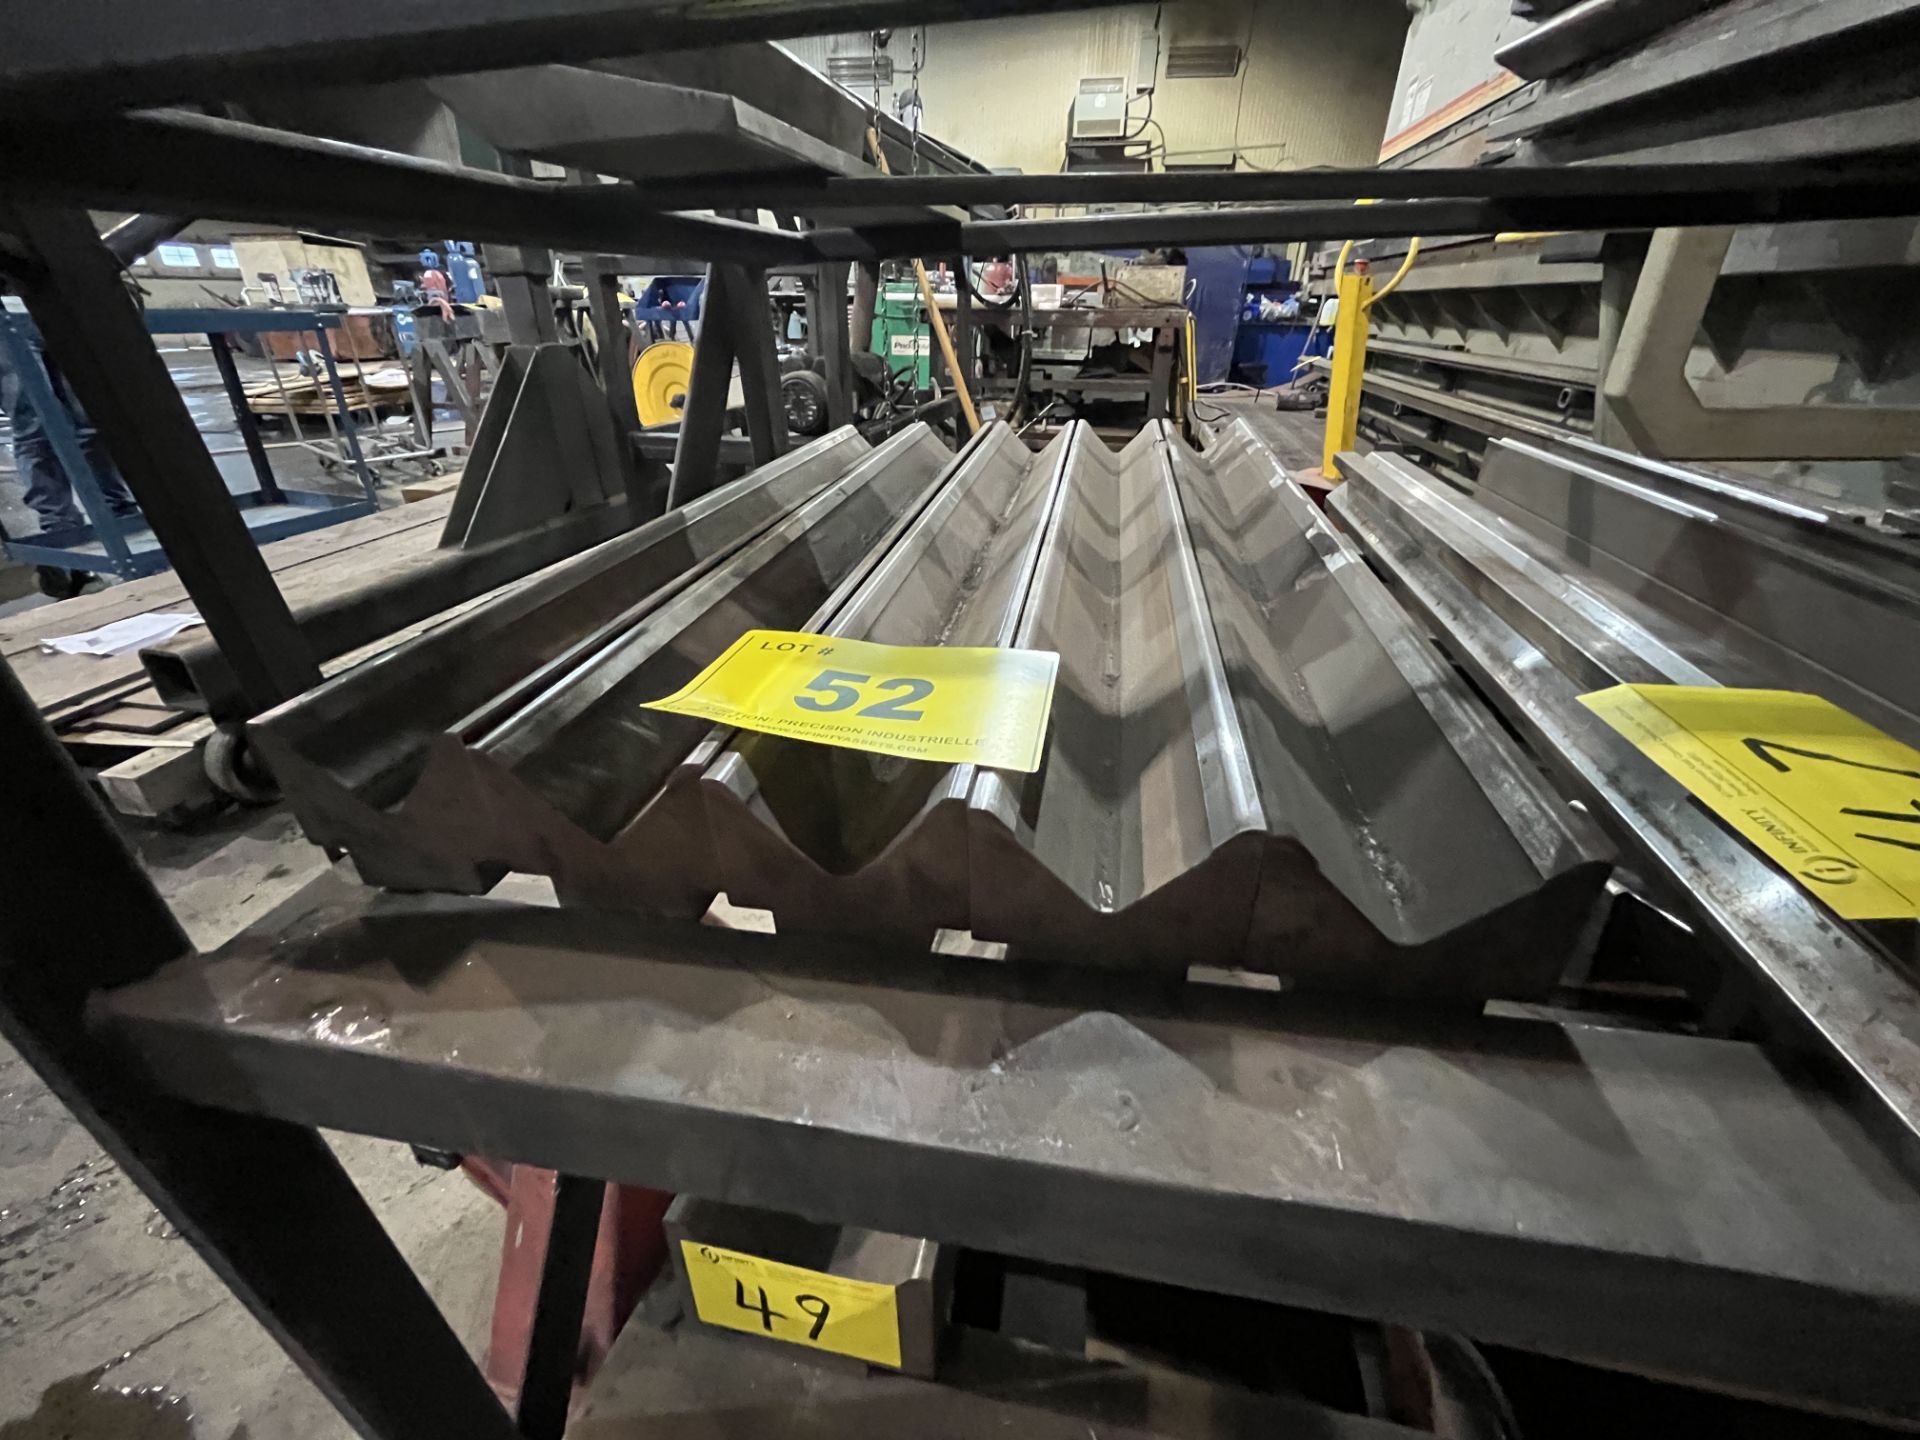 LOT OF (5) APPROX. 33"L LOWER PRESS BRAKE DIES, 165" TOTAL LENGTH (13'9"), APPROX. 3-3/4"W, 2-1/2"H